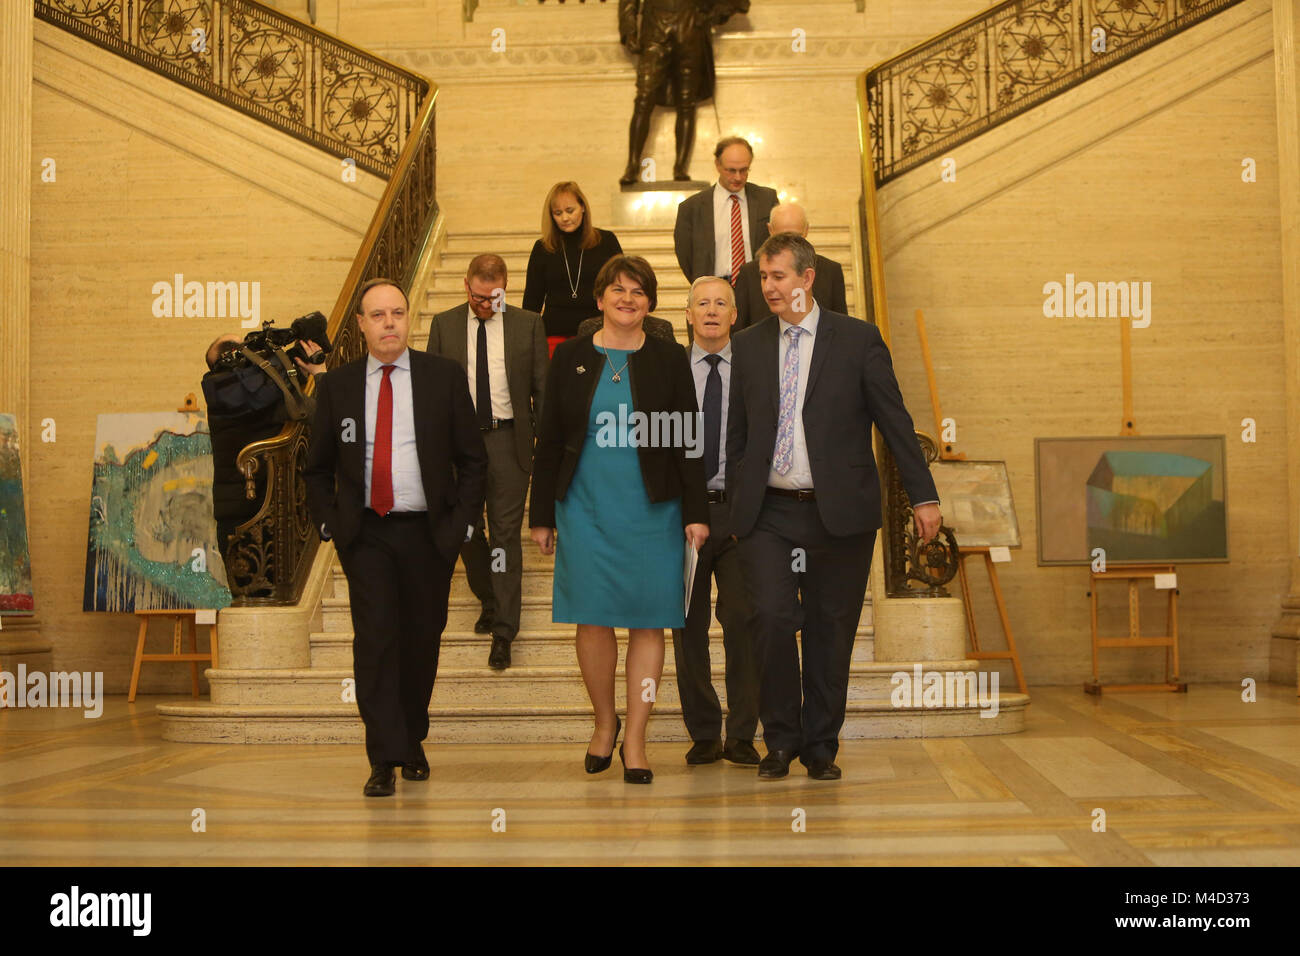 DUP Leader Arlene Foster speaks to the media inside Stormont Parliament Buildings,  Belfast, Monday, Feb 12th, 2018. Britain's Prime Minister Theresa May and Irish Prime Minister Leo Varadkar are to visit Belfast later for talks with the Stormont parties. The Prime Ministers left without a deal to restore devolved government. Stock Photo